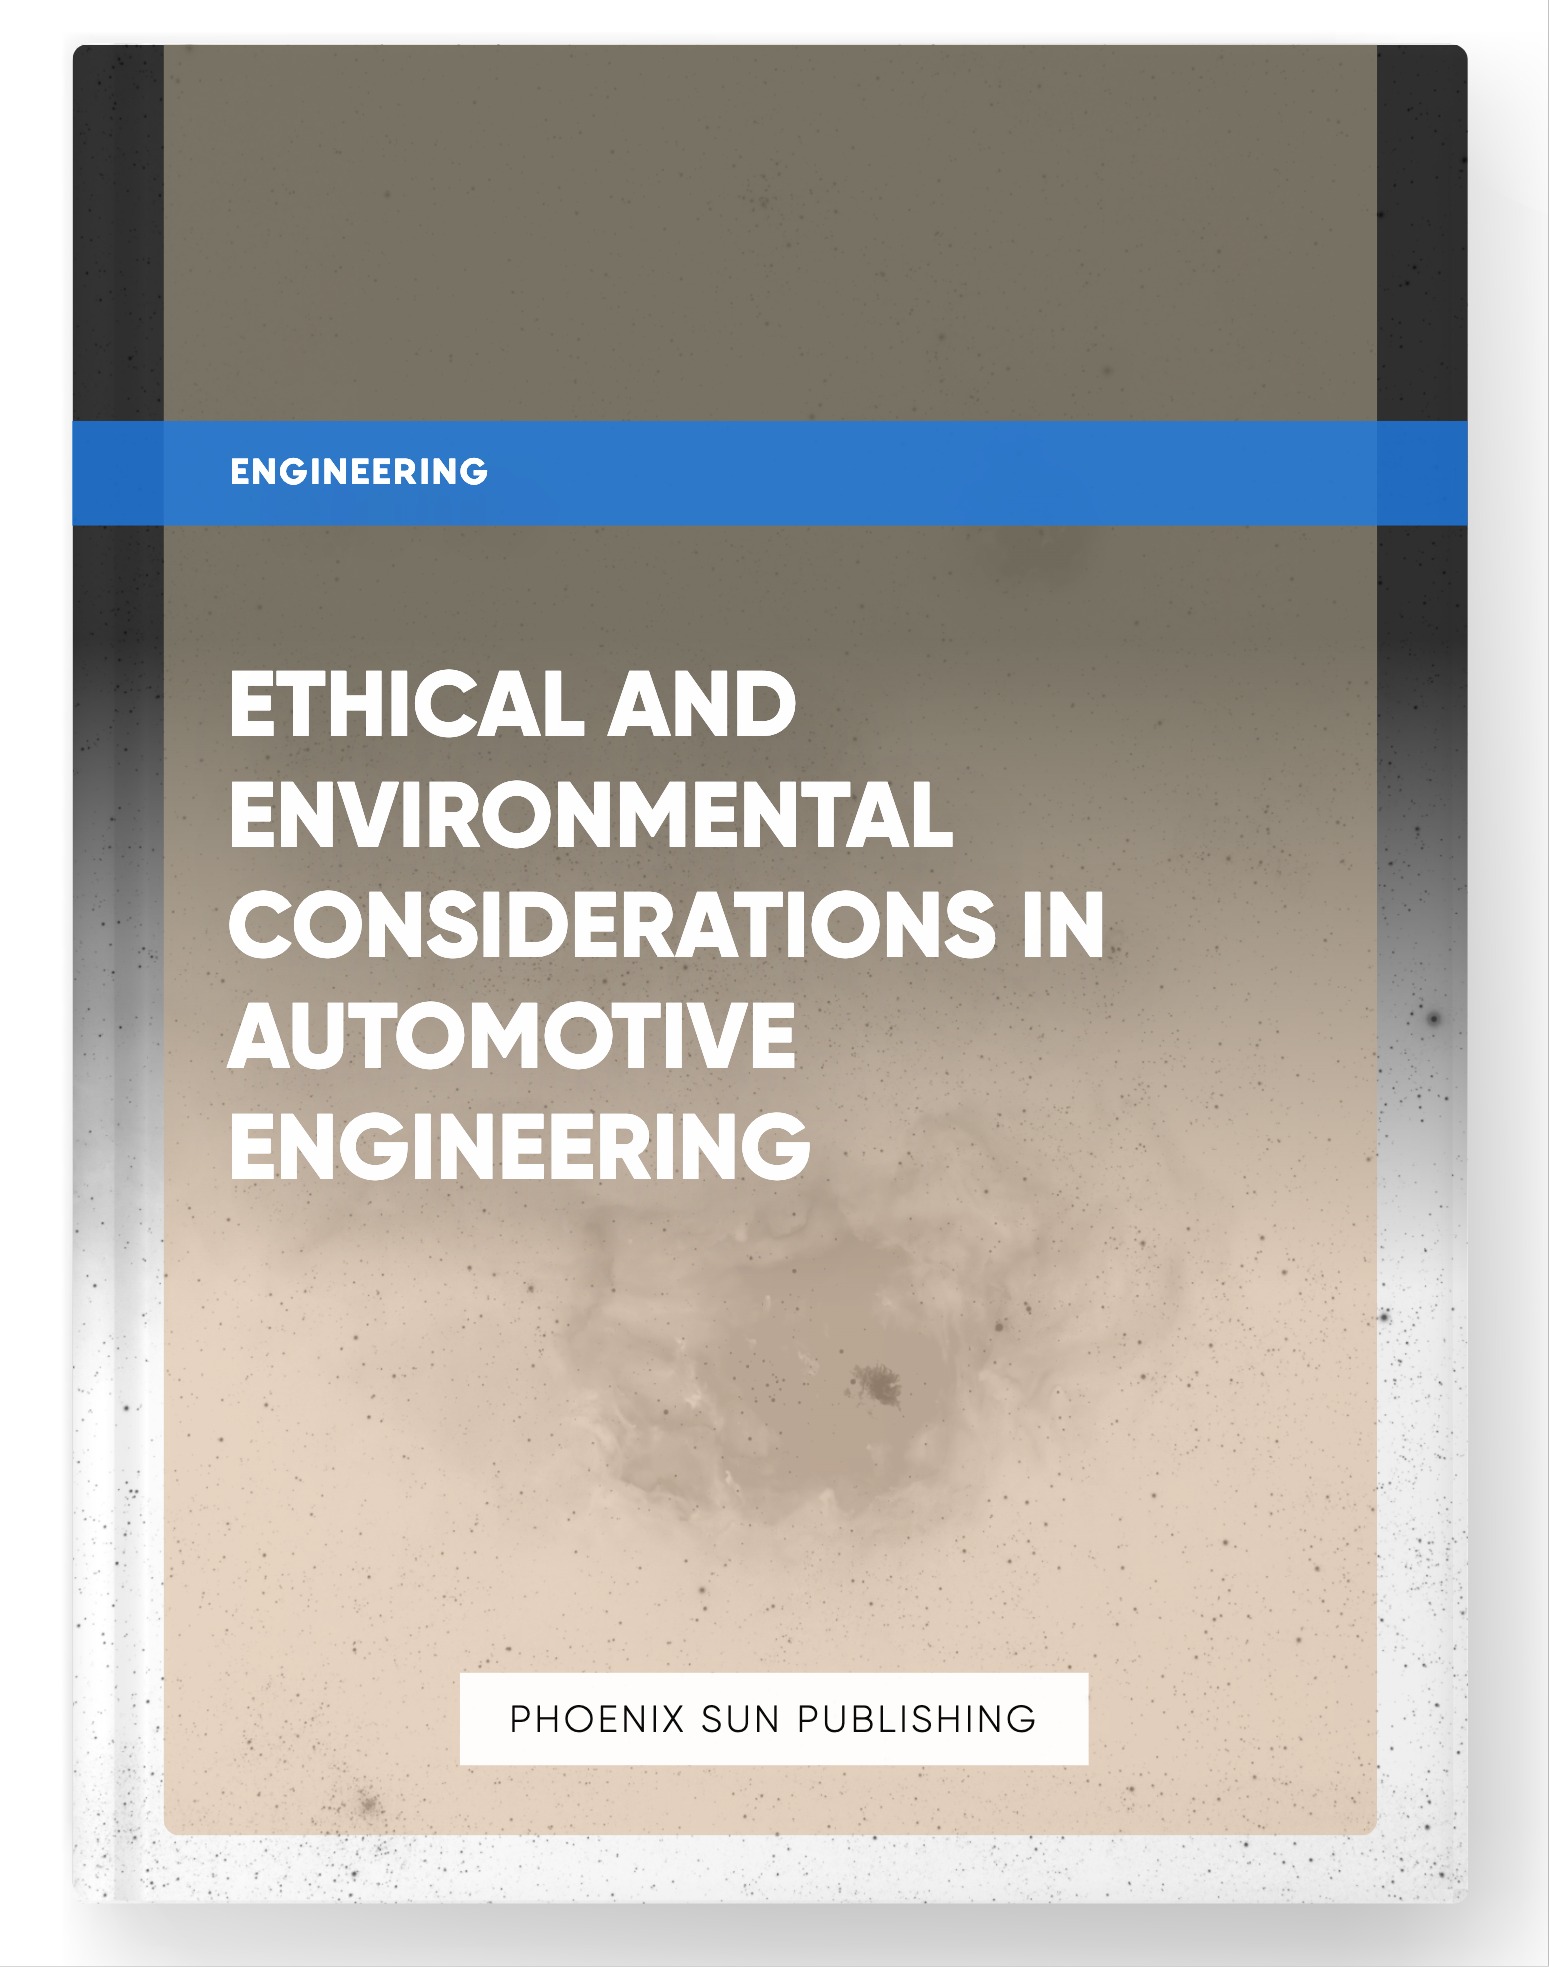 Ethical and Environmental Considerations in Automotive Engineering